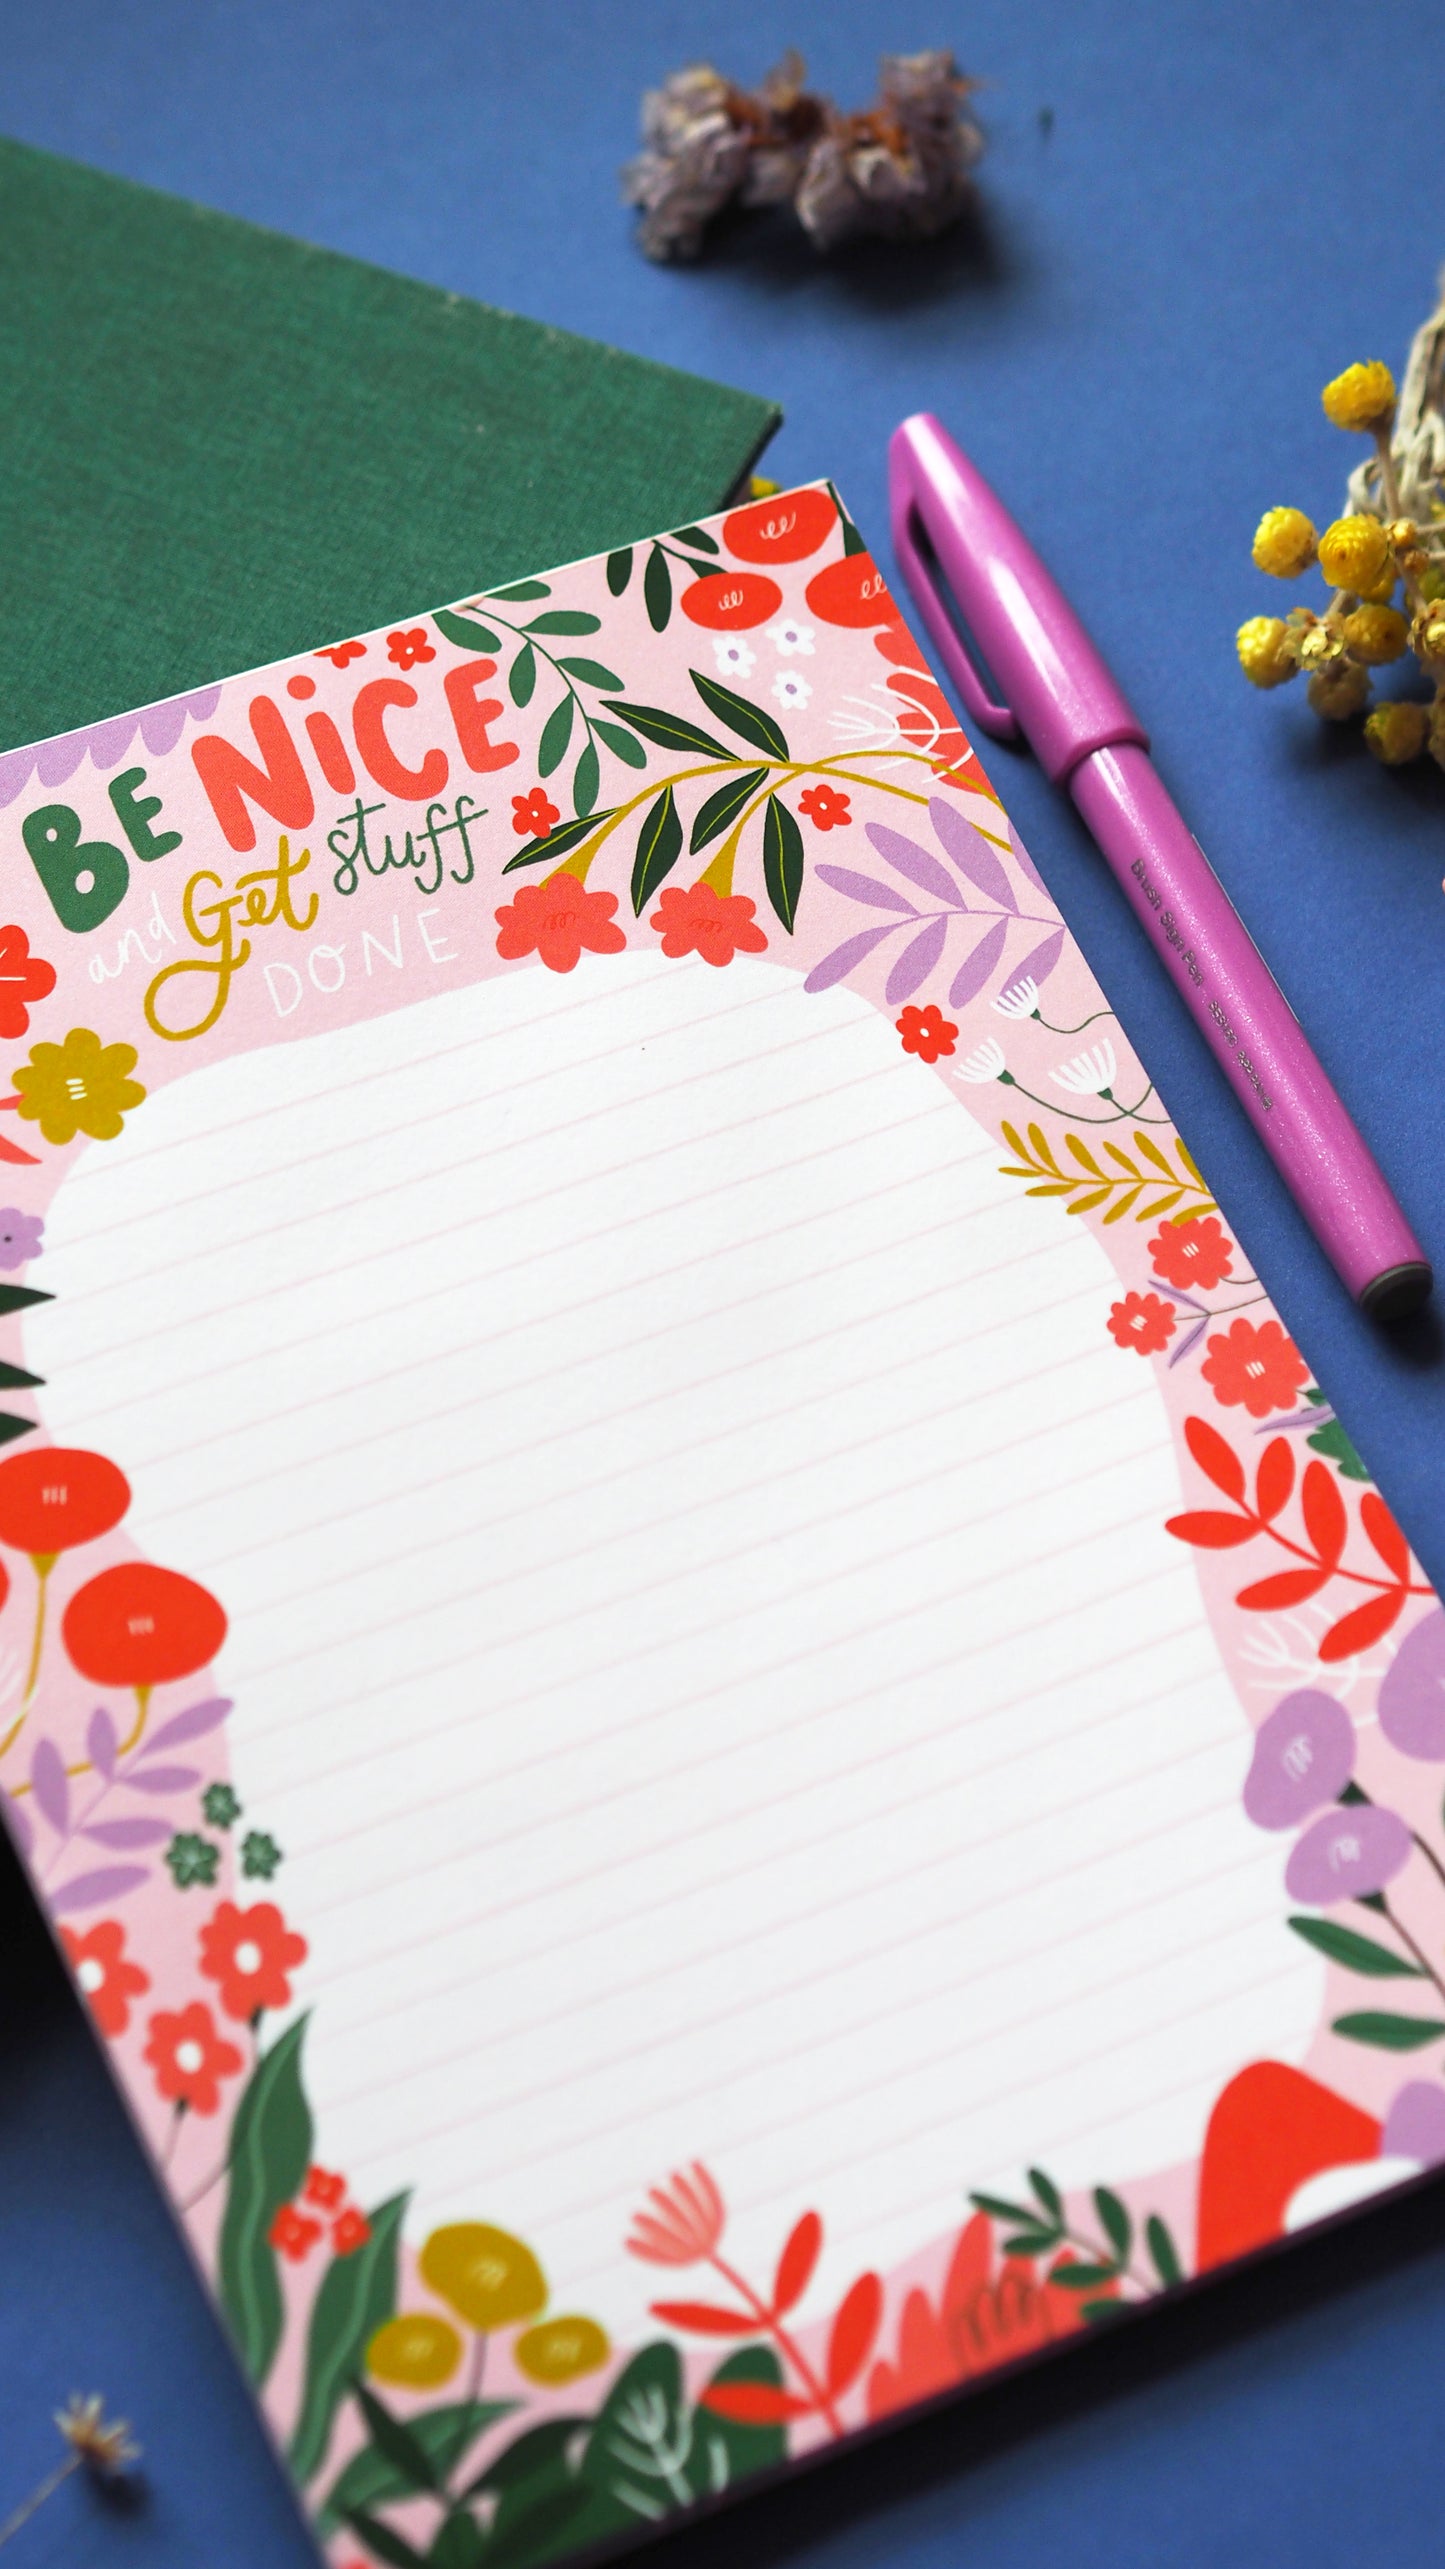 A5 list pad with 'be nice and get stuff done' written at the top in illustrated type, a floral border around the edge of the lined section with lots of fun florals and leaves. pink, green red and lilac are the main colours